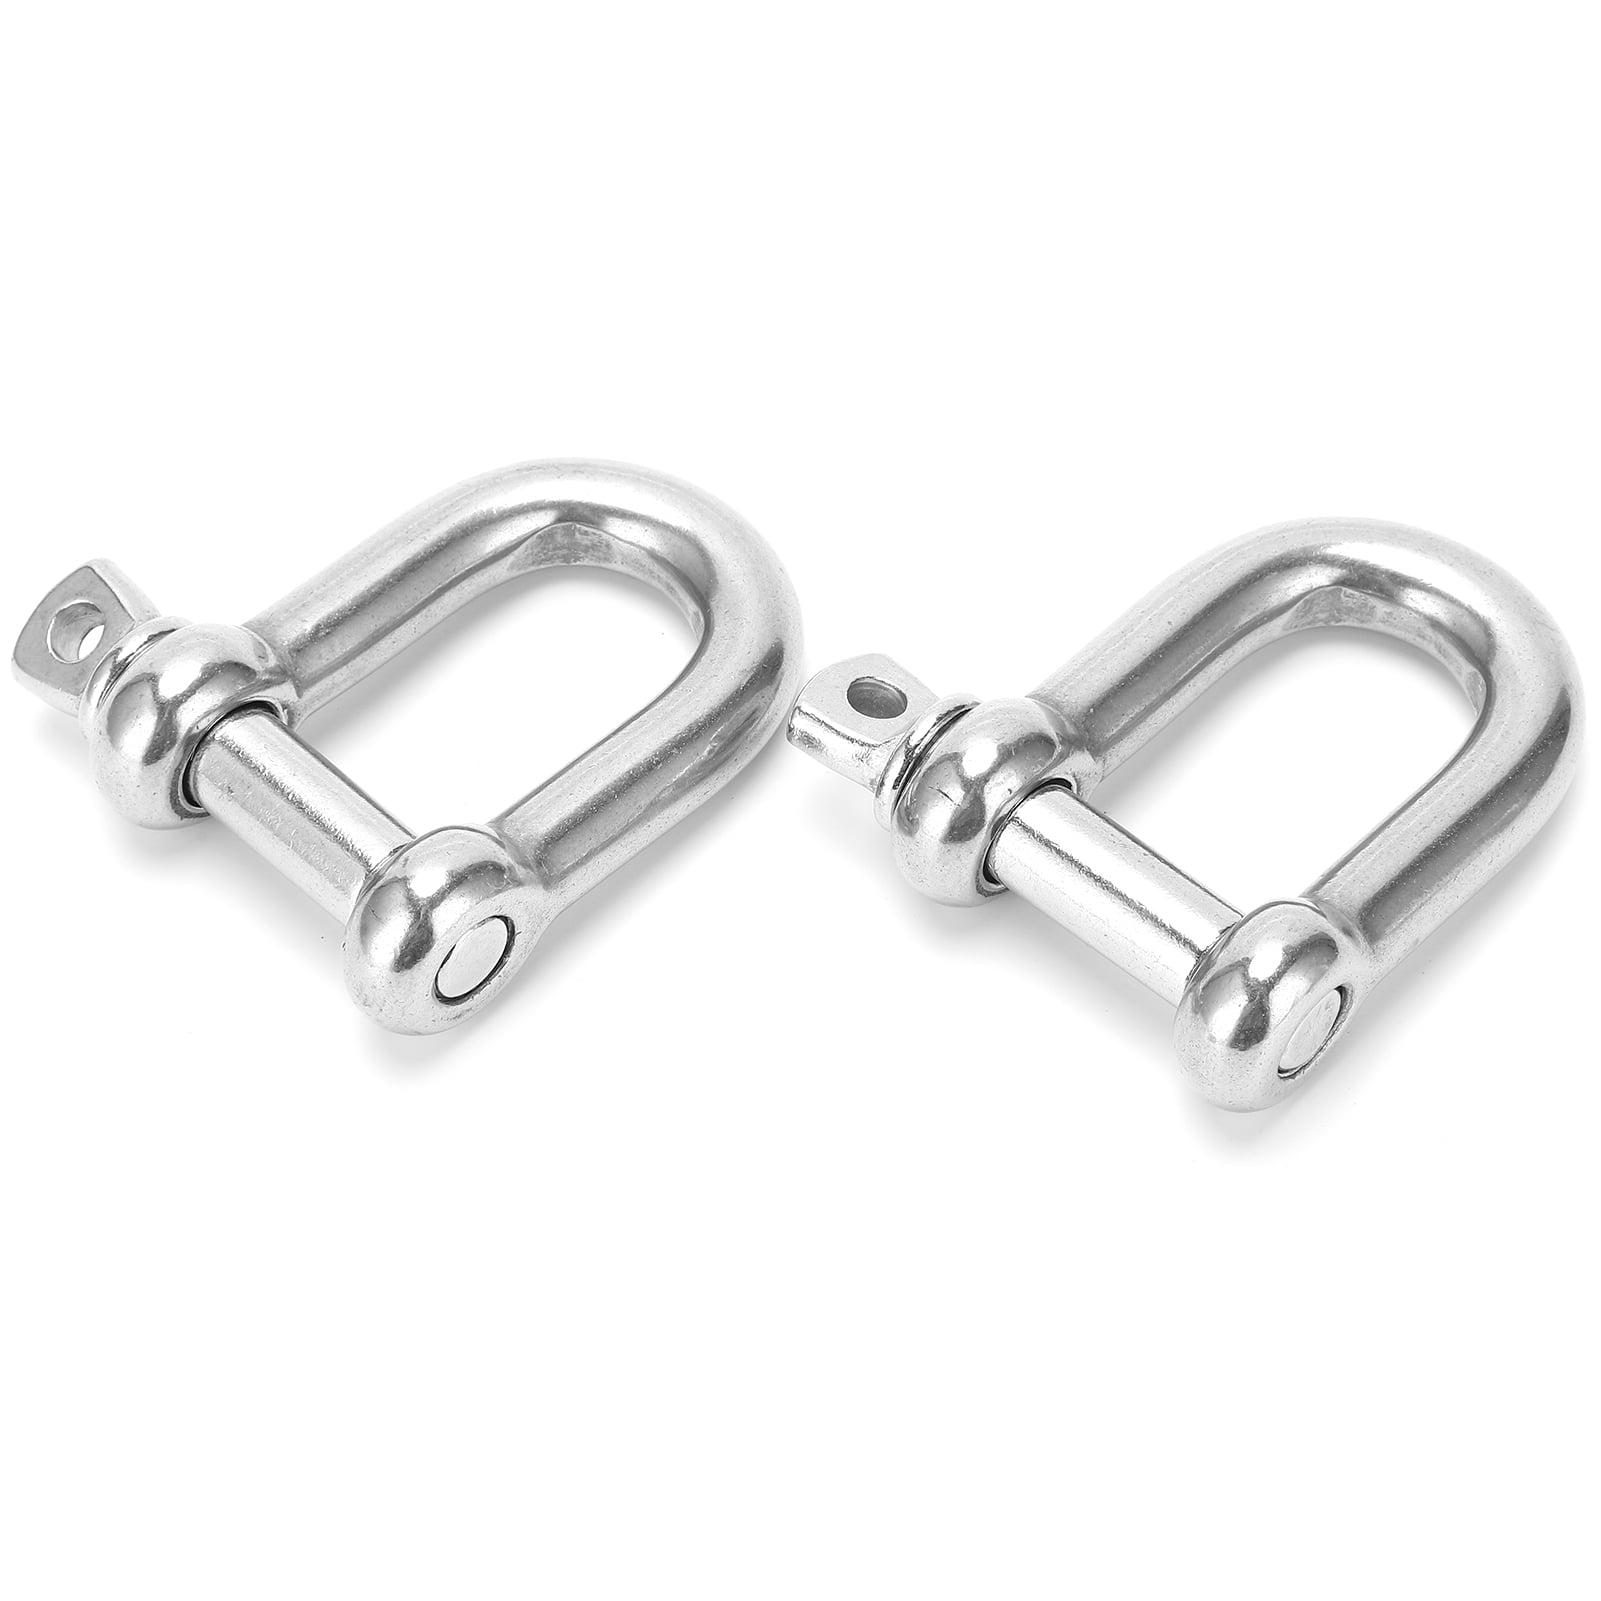 PHITUODA 5pcs 5/32 D Ring Bow Shackle Stainless Steel Heavy Duty Rugged Off Road Shackles for Survival Rope Paracord Camping 